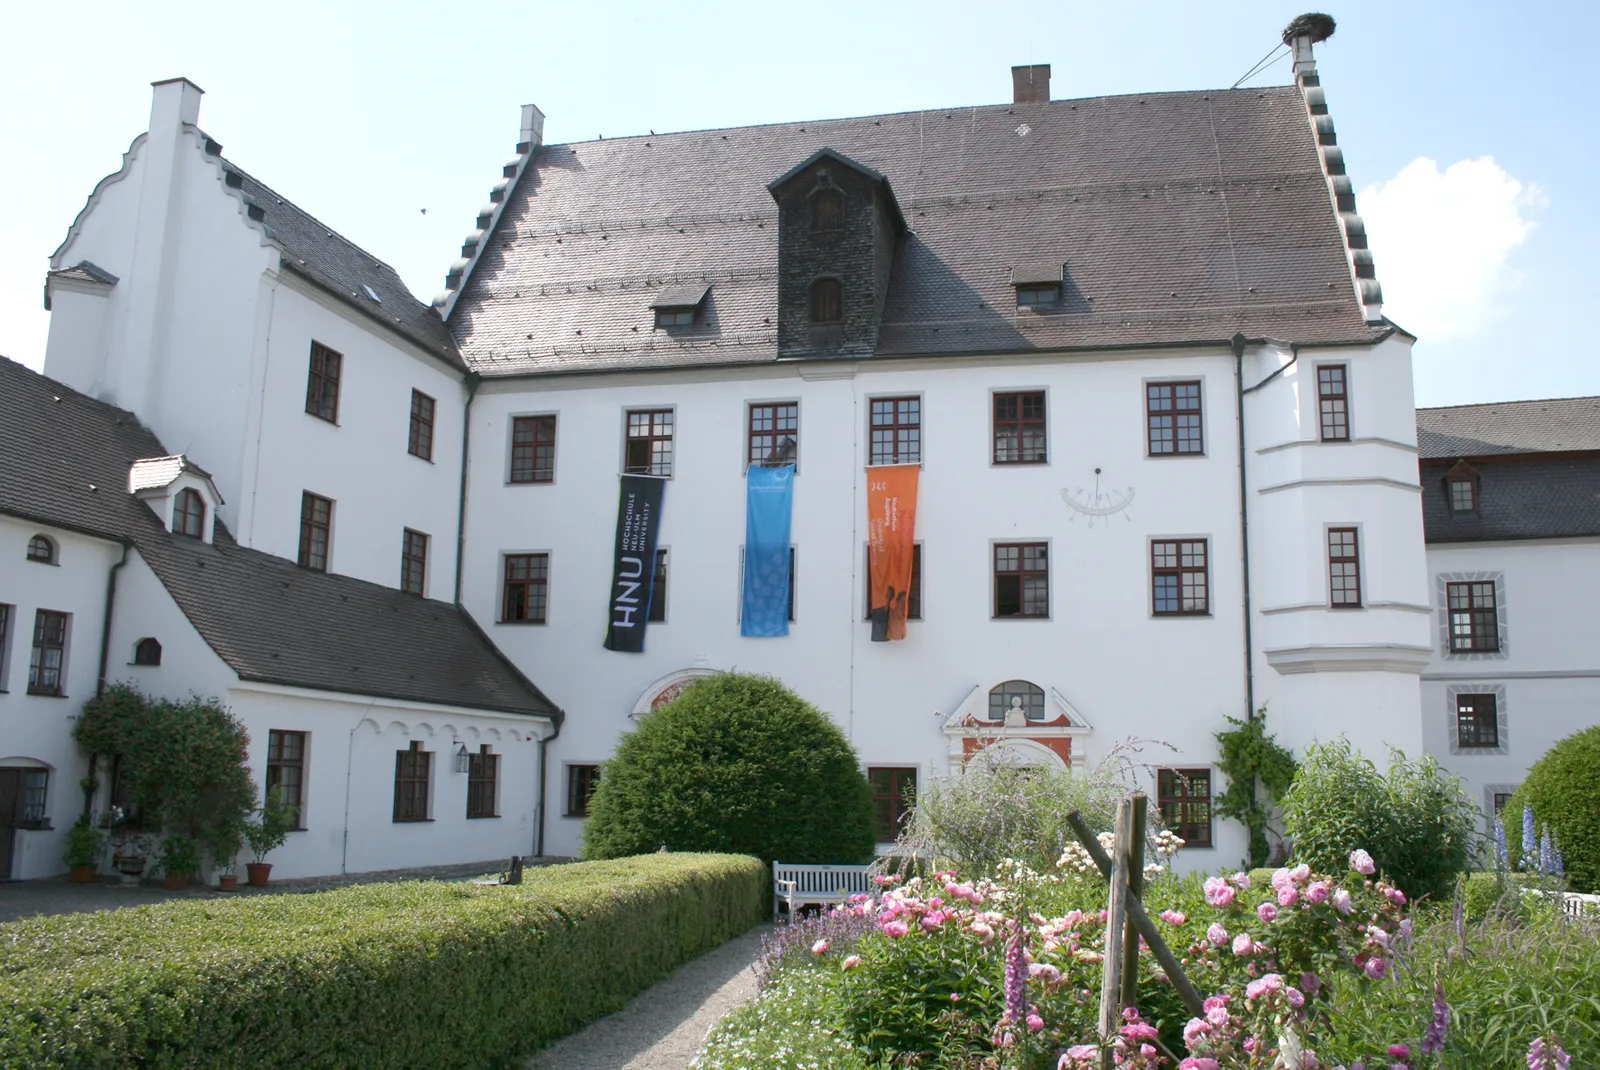 Photo showing: The rear building of the Vöhlinschloss Illertissen, a Renaissance castle housing the conference and convention center "Hochschulzentrum Vöhlinschloss", jointly run by the Universities of Applied Sciences Neu-Ulm, Kempten and Augsburg.